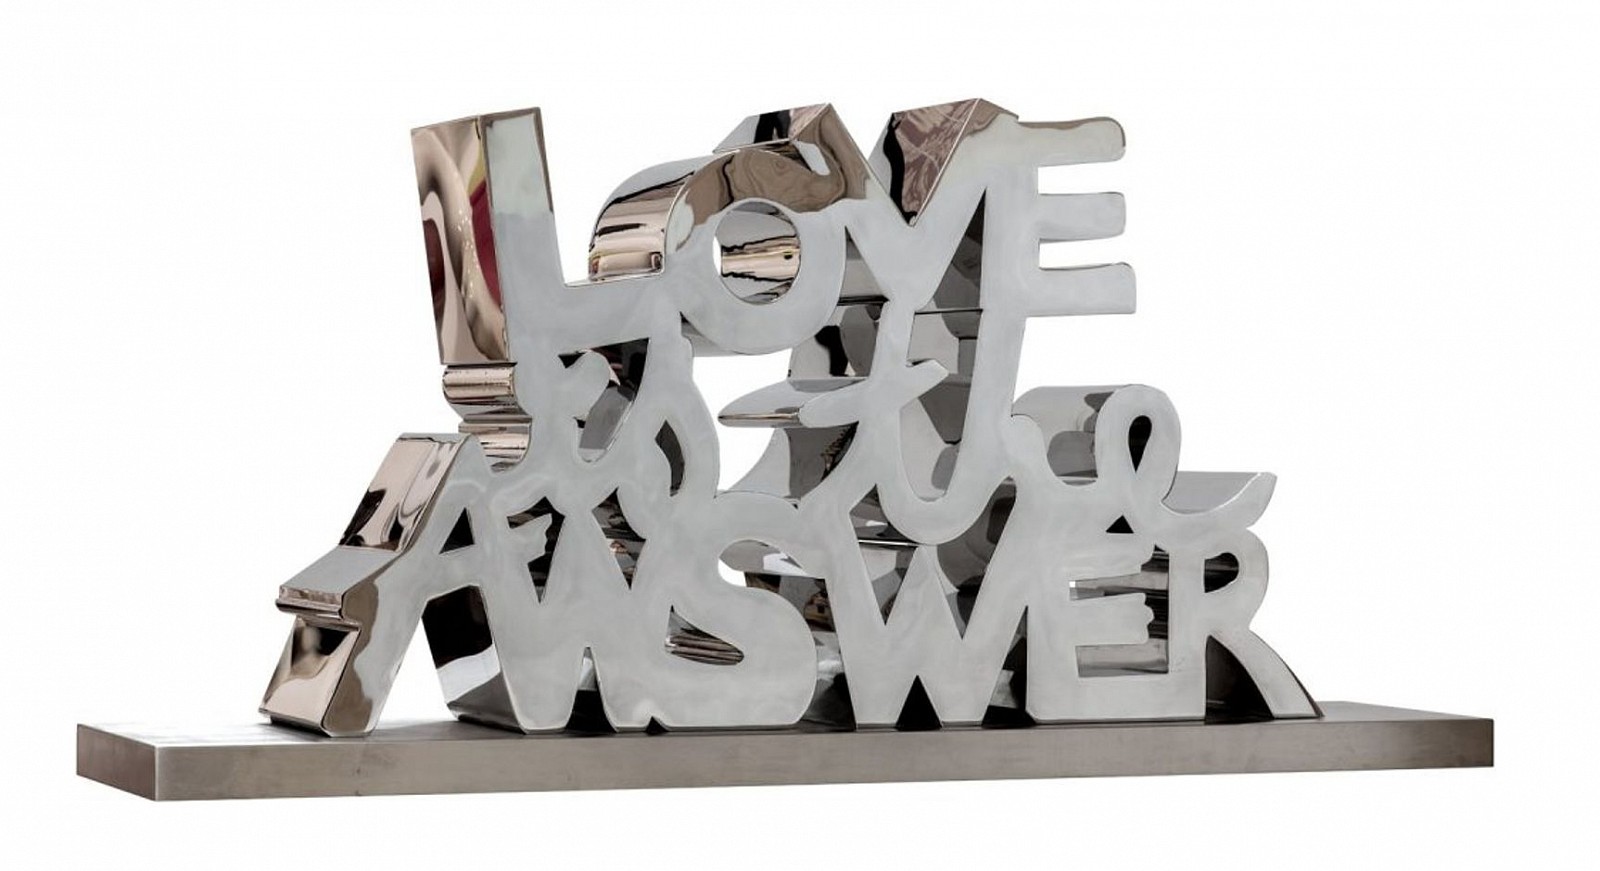 Mr. Brainwash, Love Is the Answer - Chrome Silver, 2023
Polished 316 Marine Grade Stainless Steel Sculpture, 26 x 54 1/4 x 11 3/4 in.